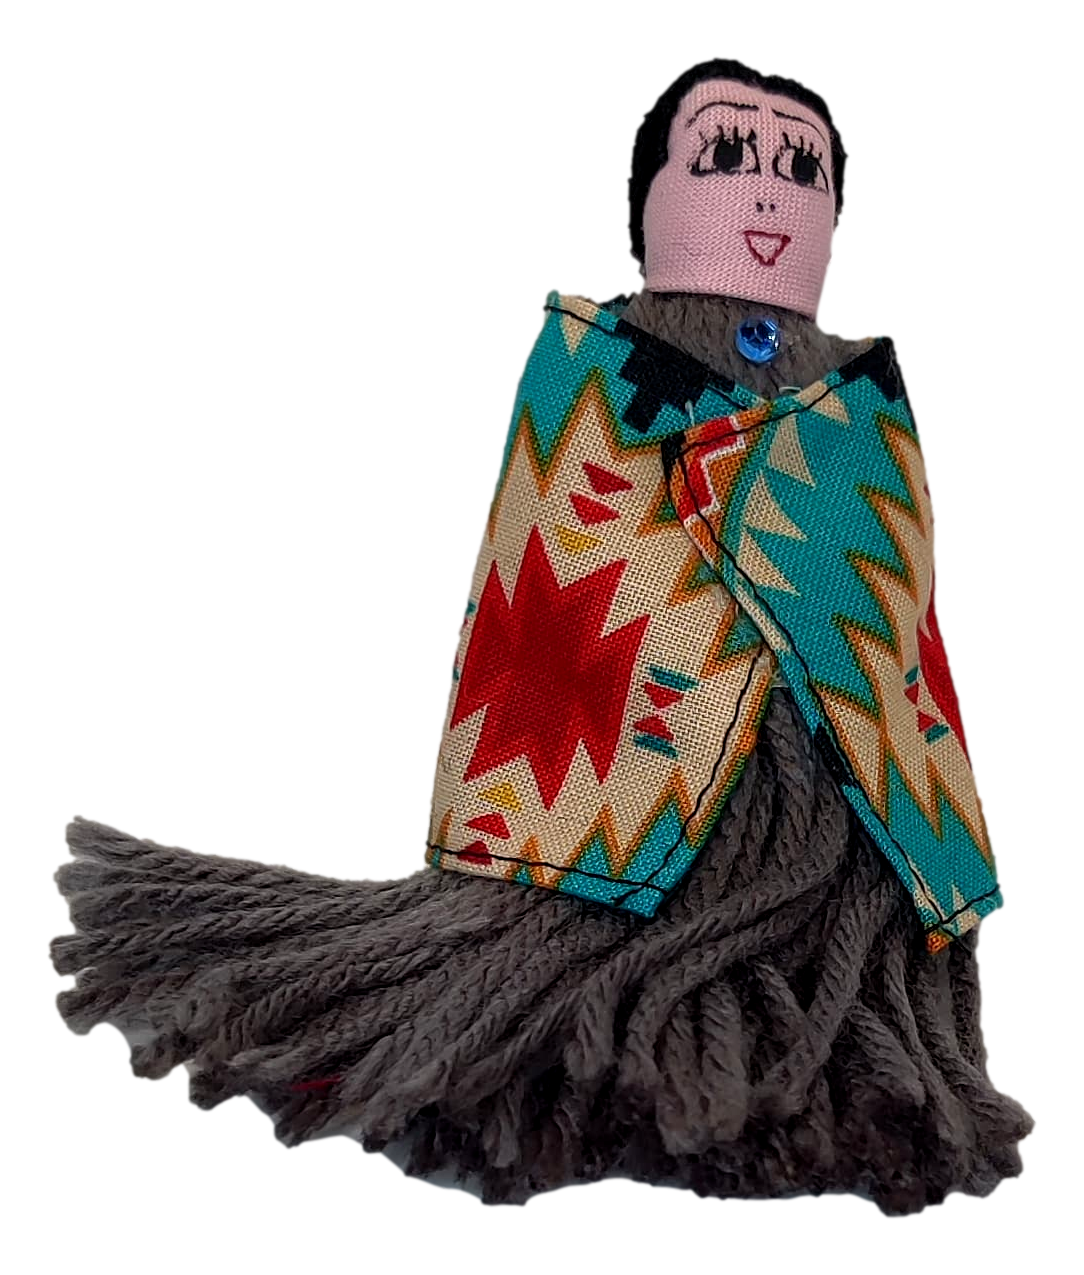 Toy Traditional Native American Dolls Handcrafted-10